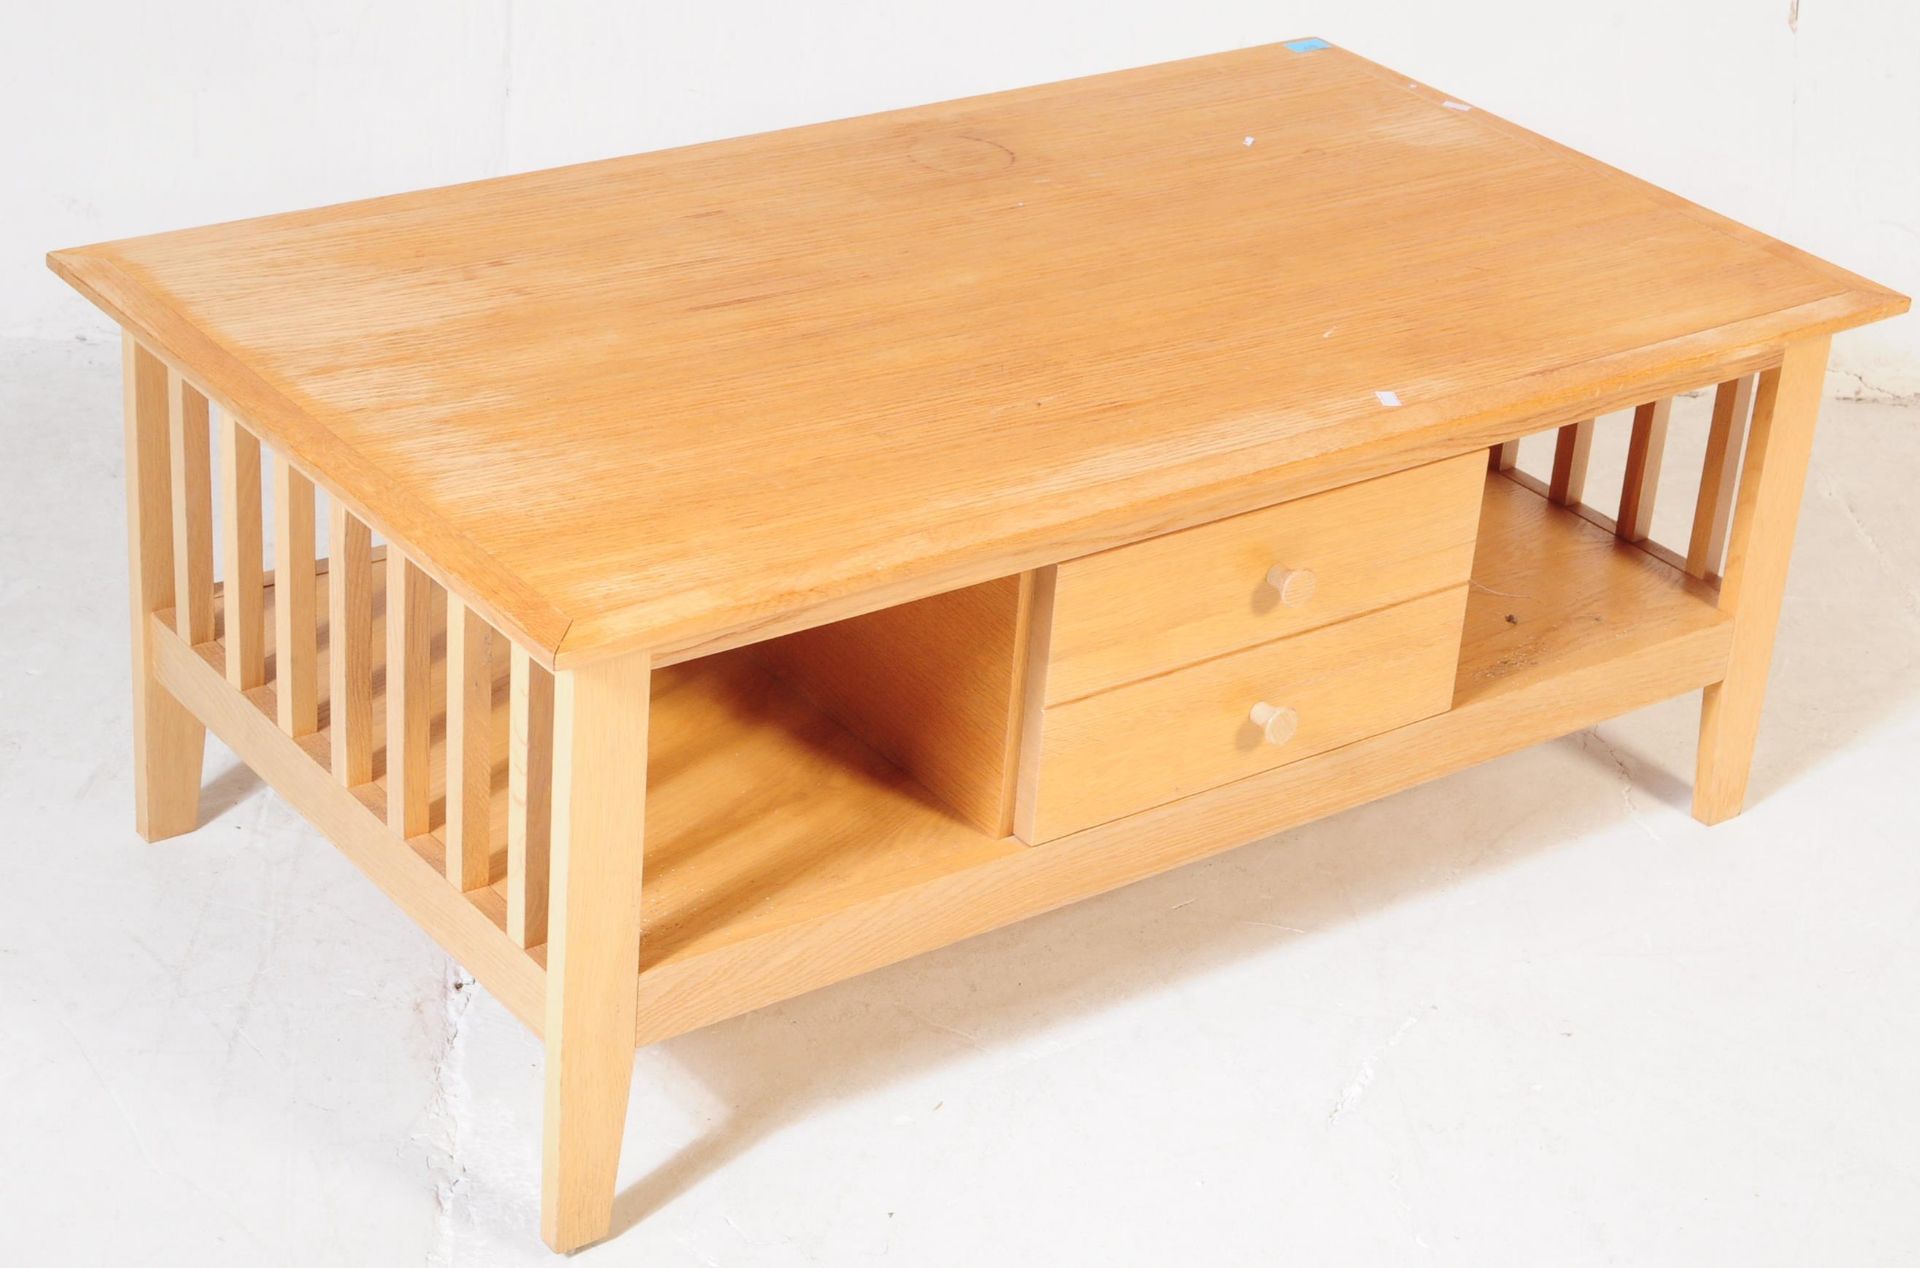 CONTEMPORARY OAK FURNITURE LAND STYLE COFFEE TABLE - Image 2 of 5